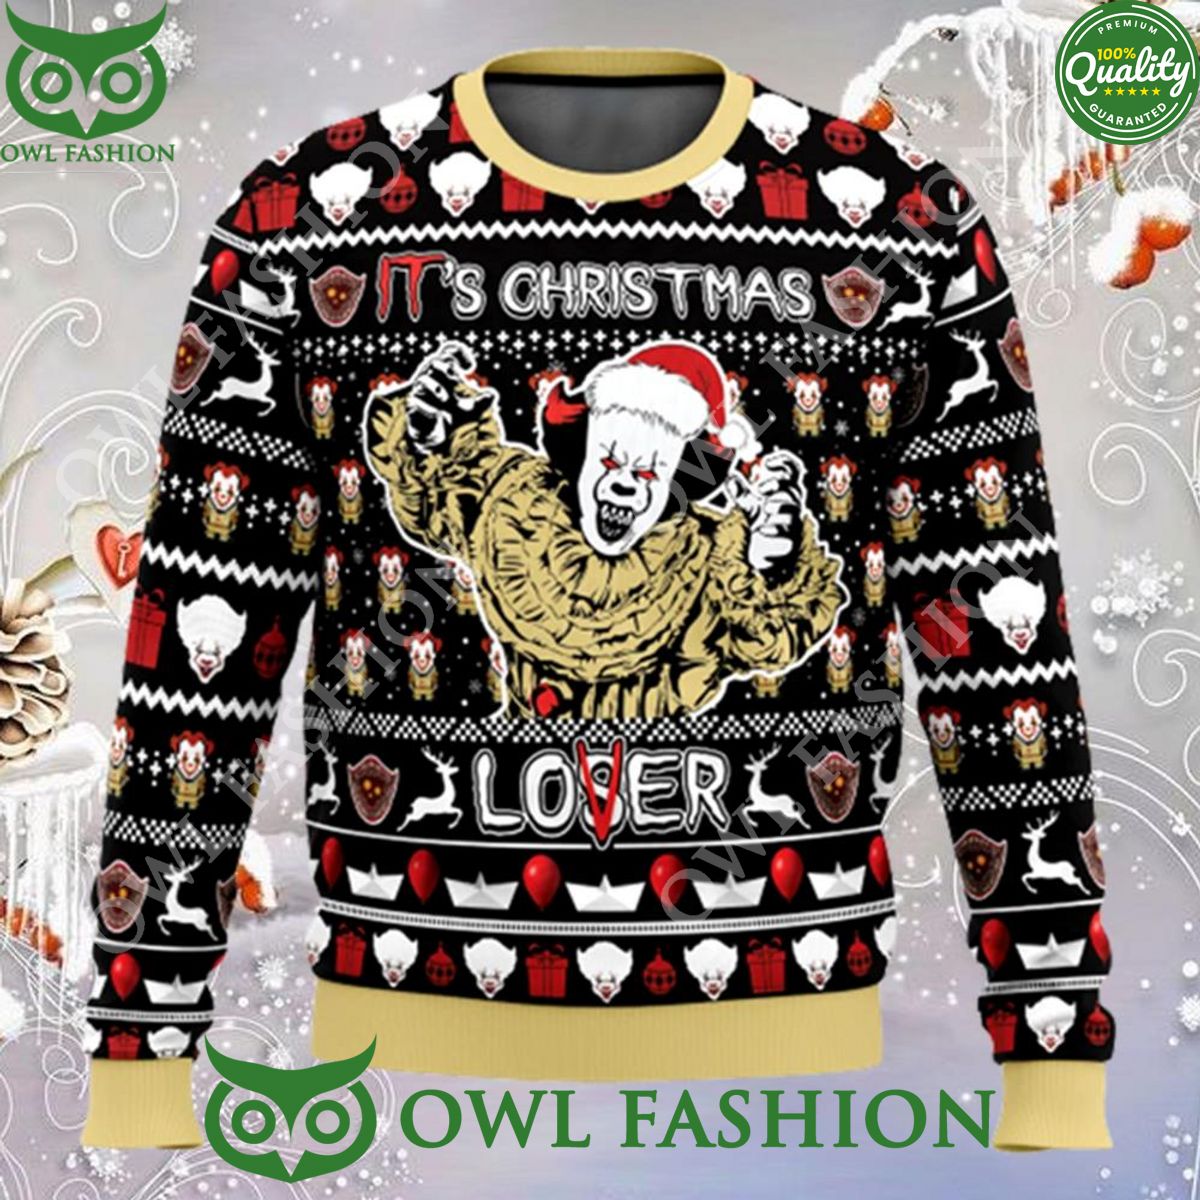 ITs Christmas Lover IT Ugly Christmas Sweater Jumper